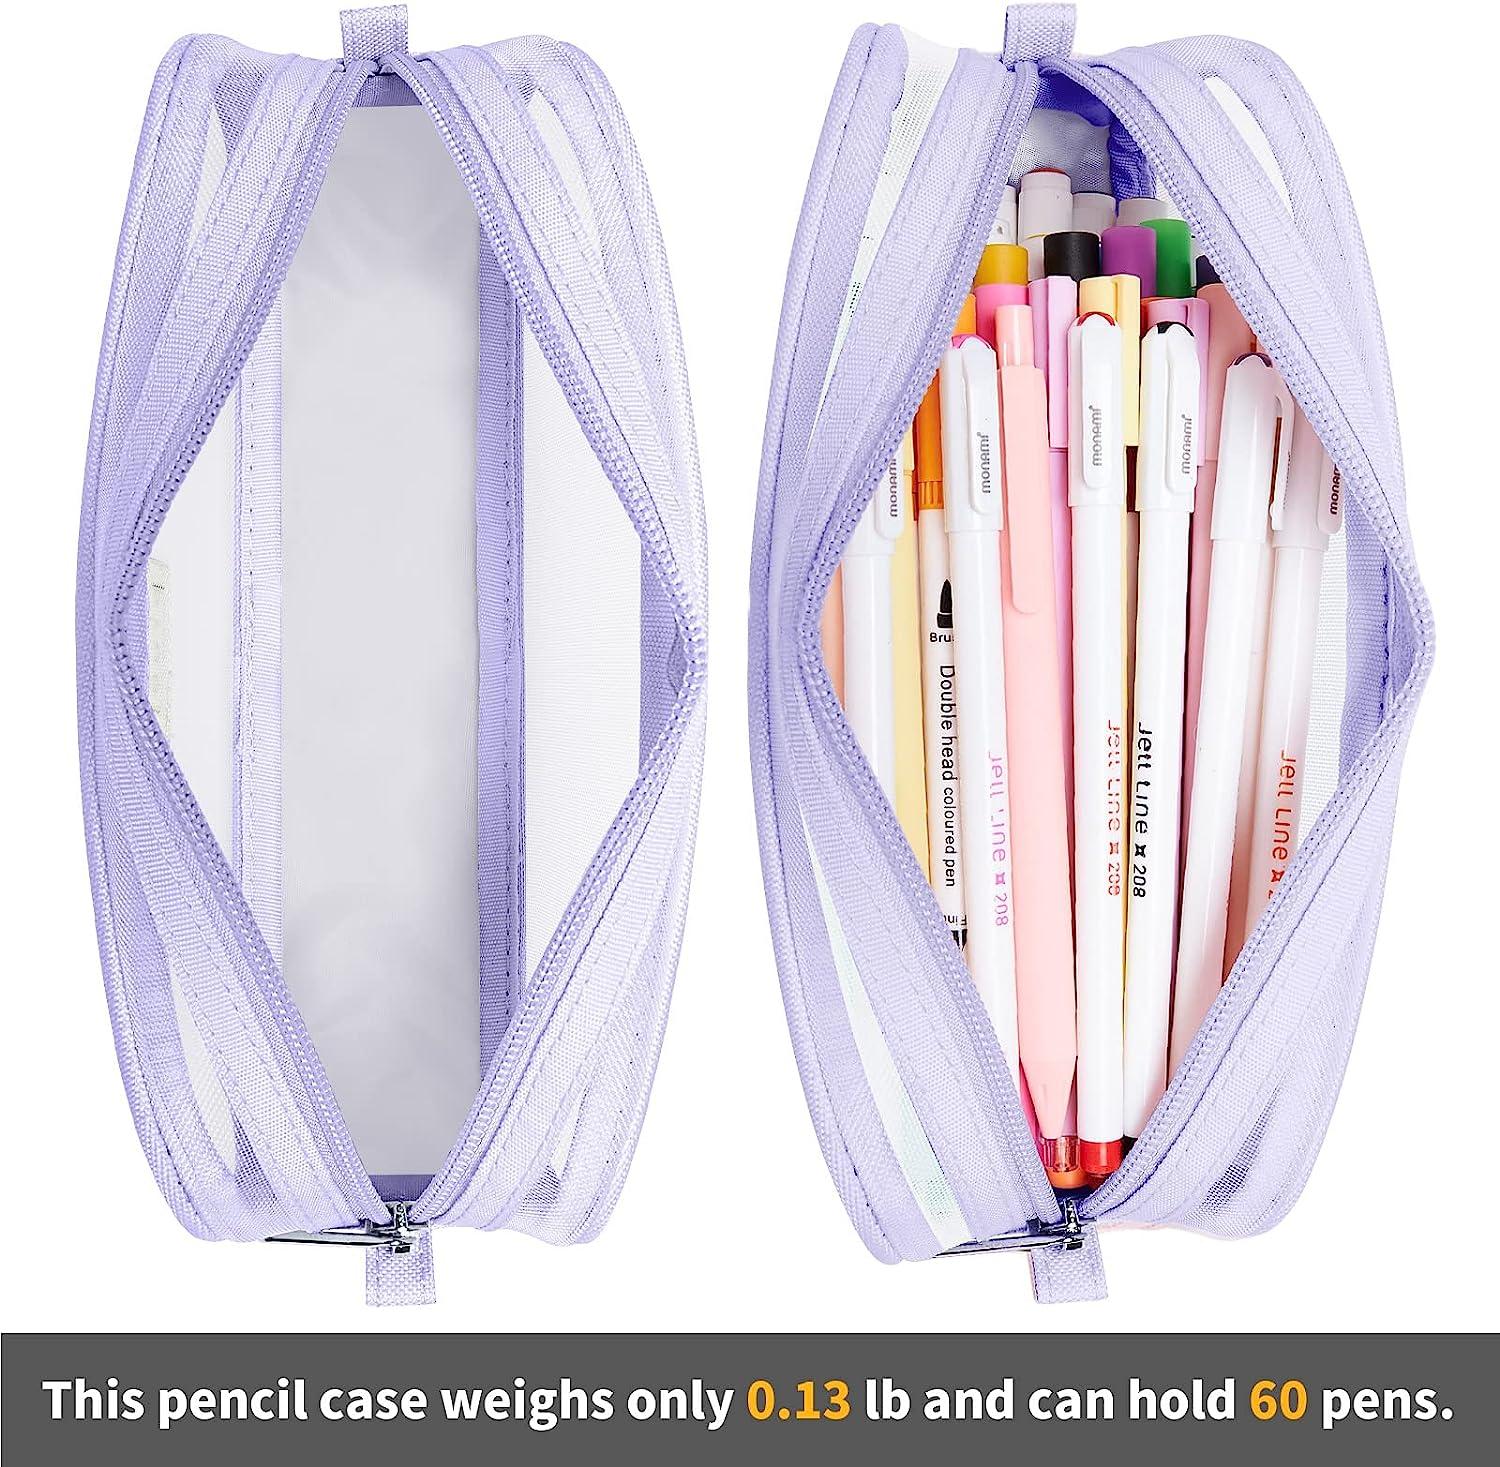 Grid Mesh Pencil Case 2 Compartment Pen Bags Clear Handheld Multifunction  Pencil Pouch For Teen Students Light Brown